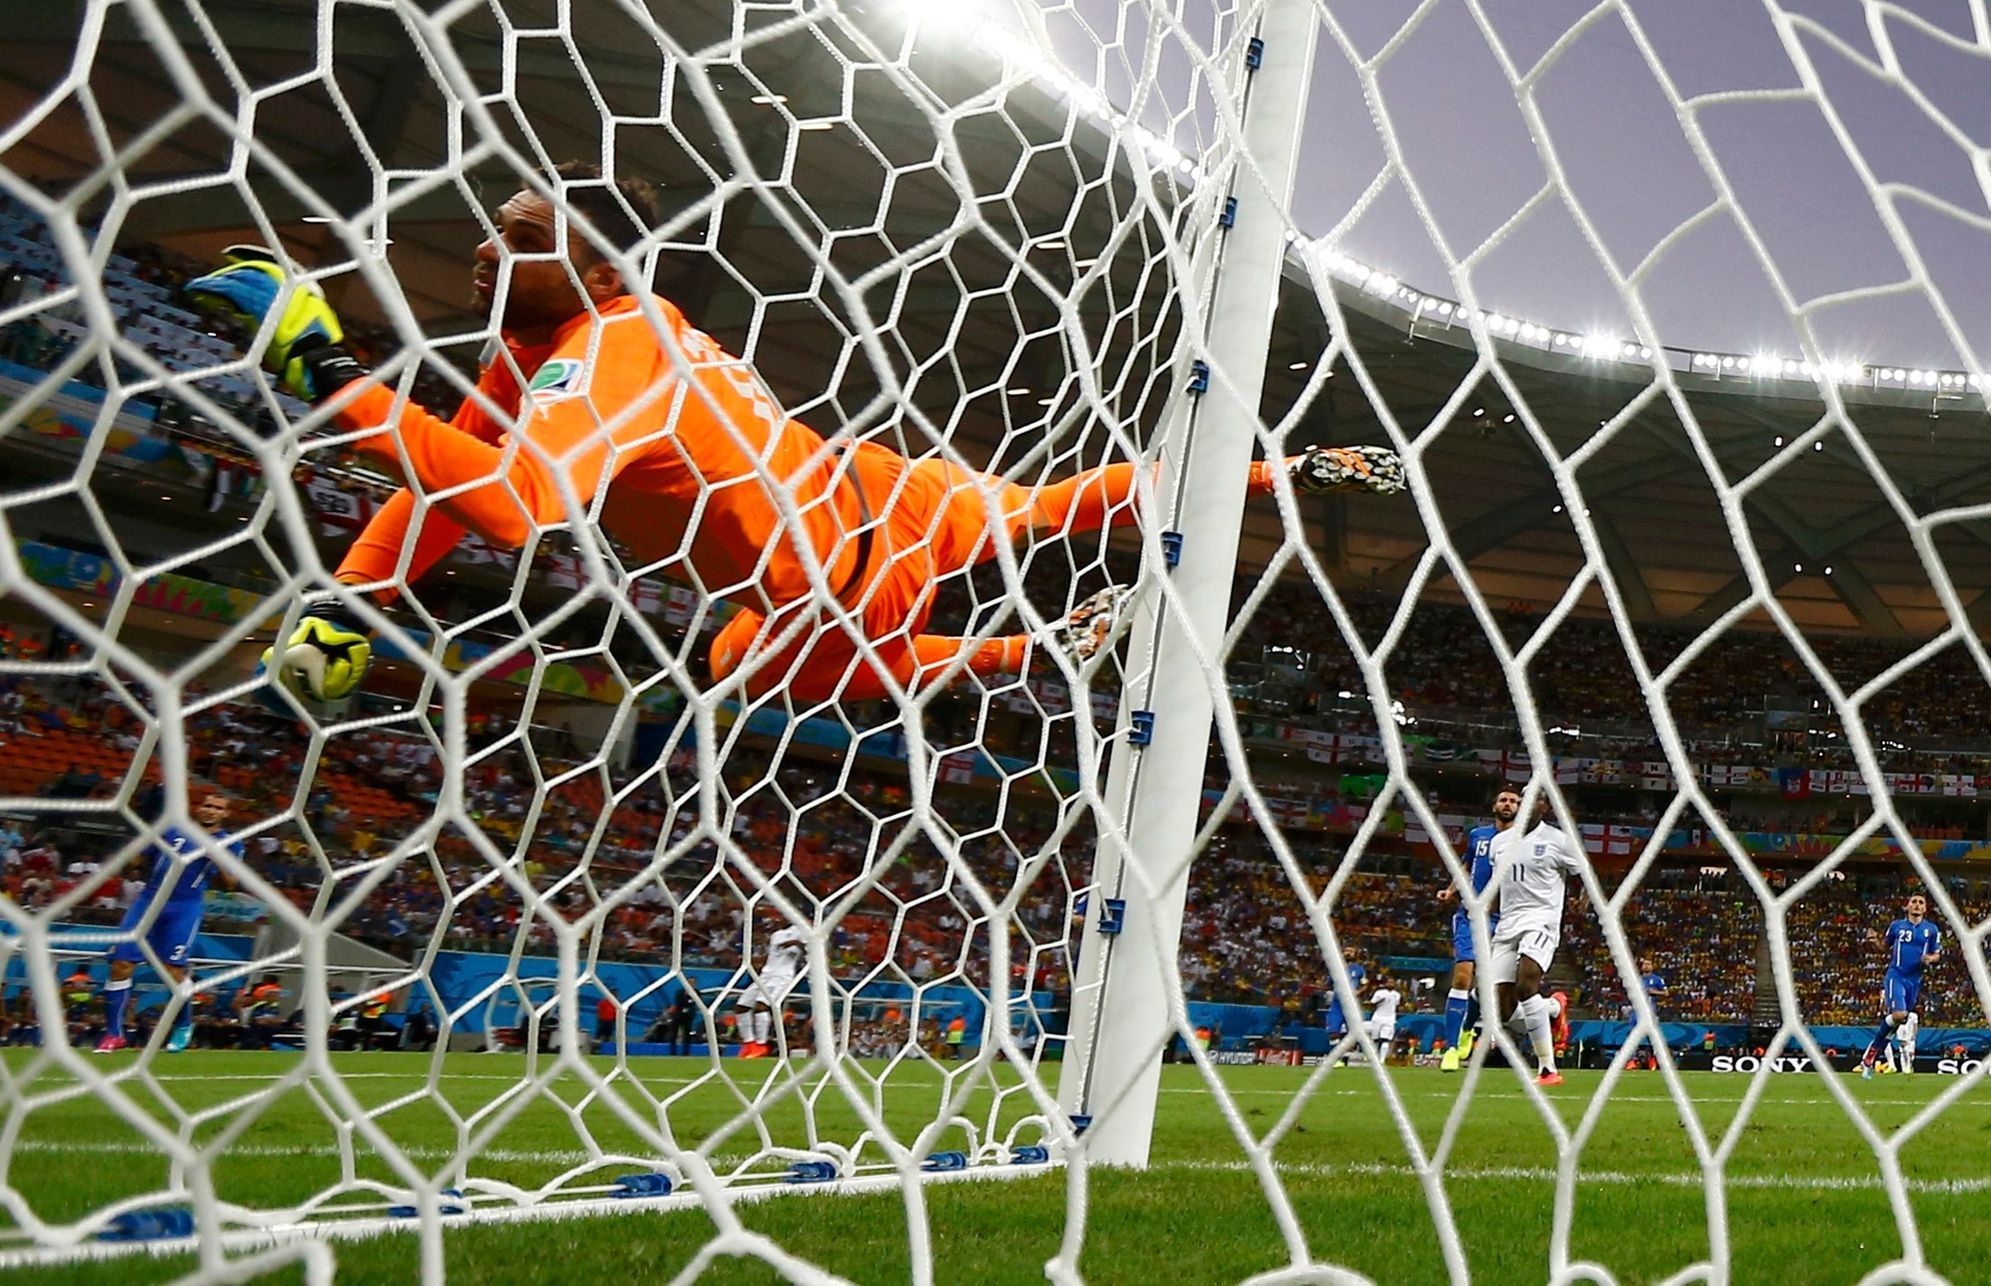 Italy's Sirigu dives as he watches a shot by England's Sterling hit the side netting during their 2014 World Cup Group D soccer match at the Amazonia arena in Manaus